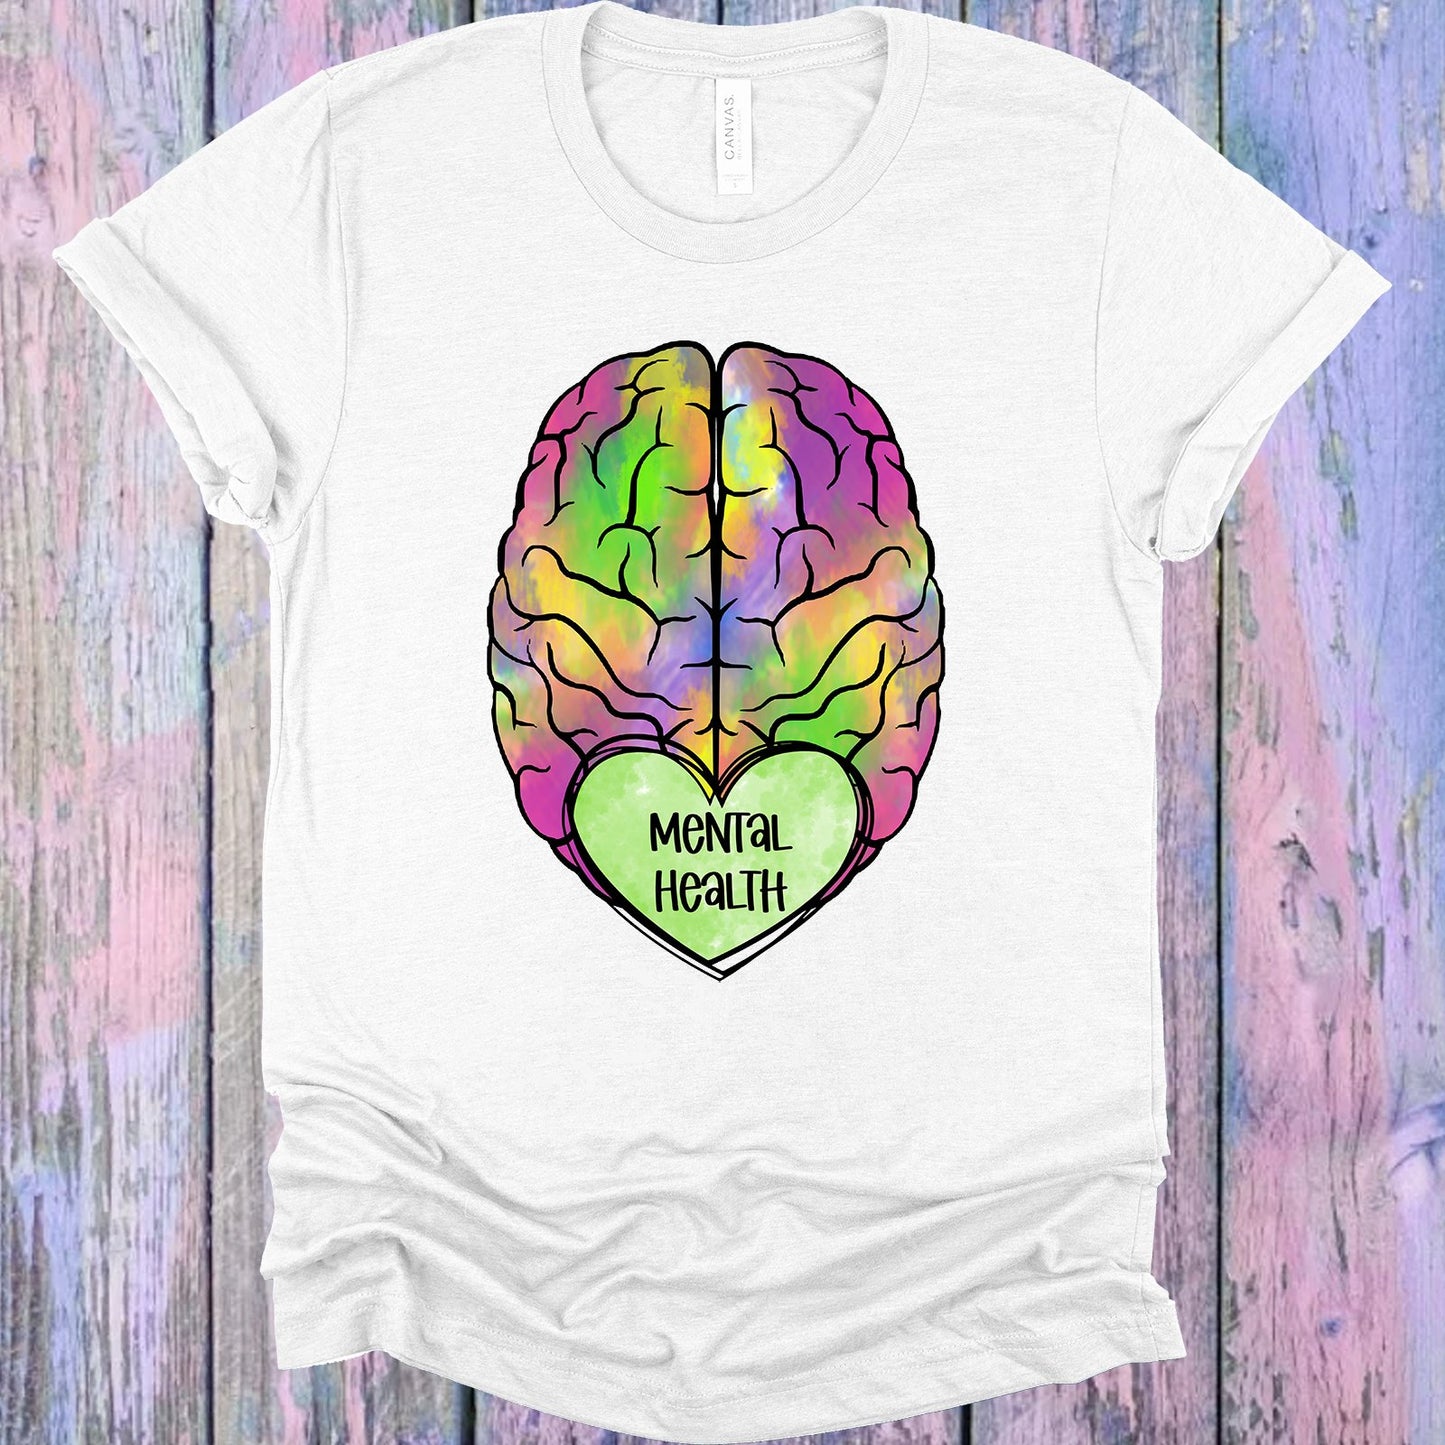 Mental Health Graphic Tee Graphic Tee